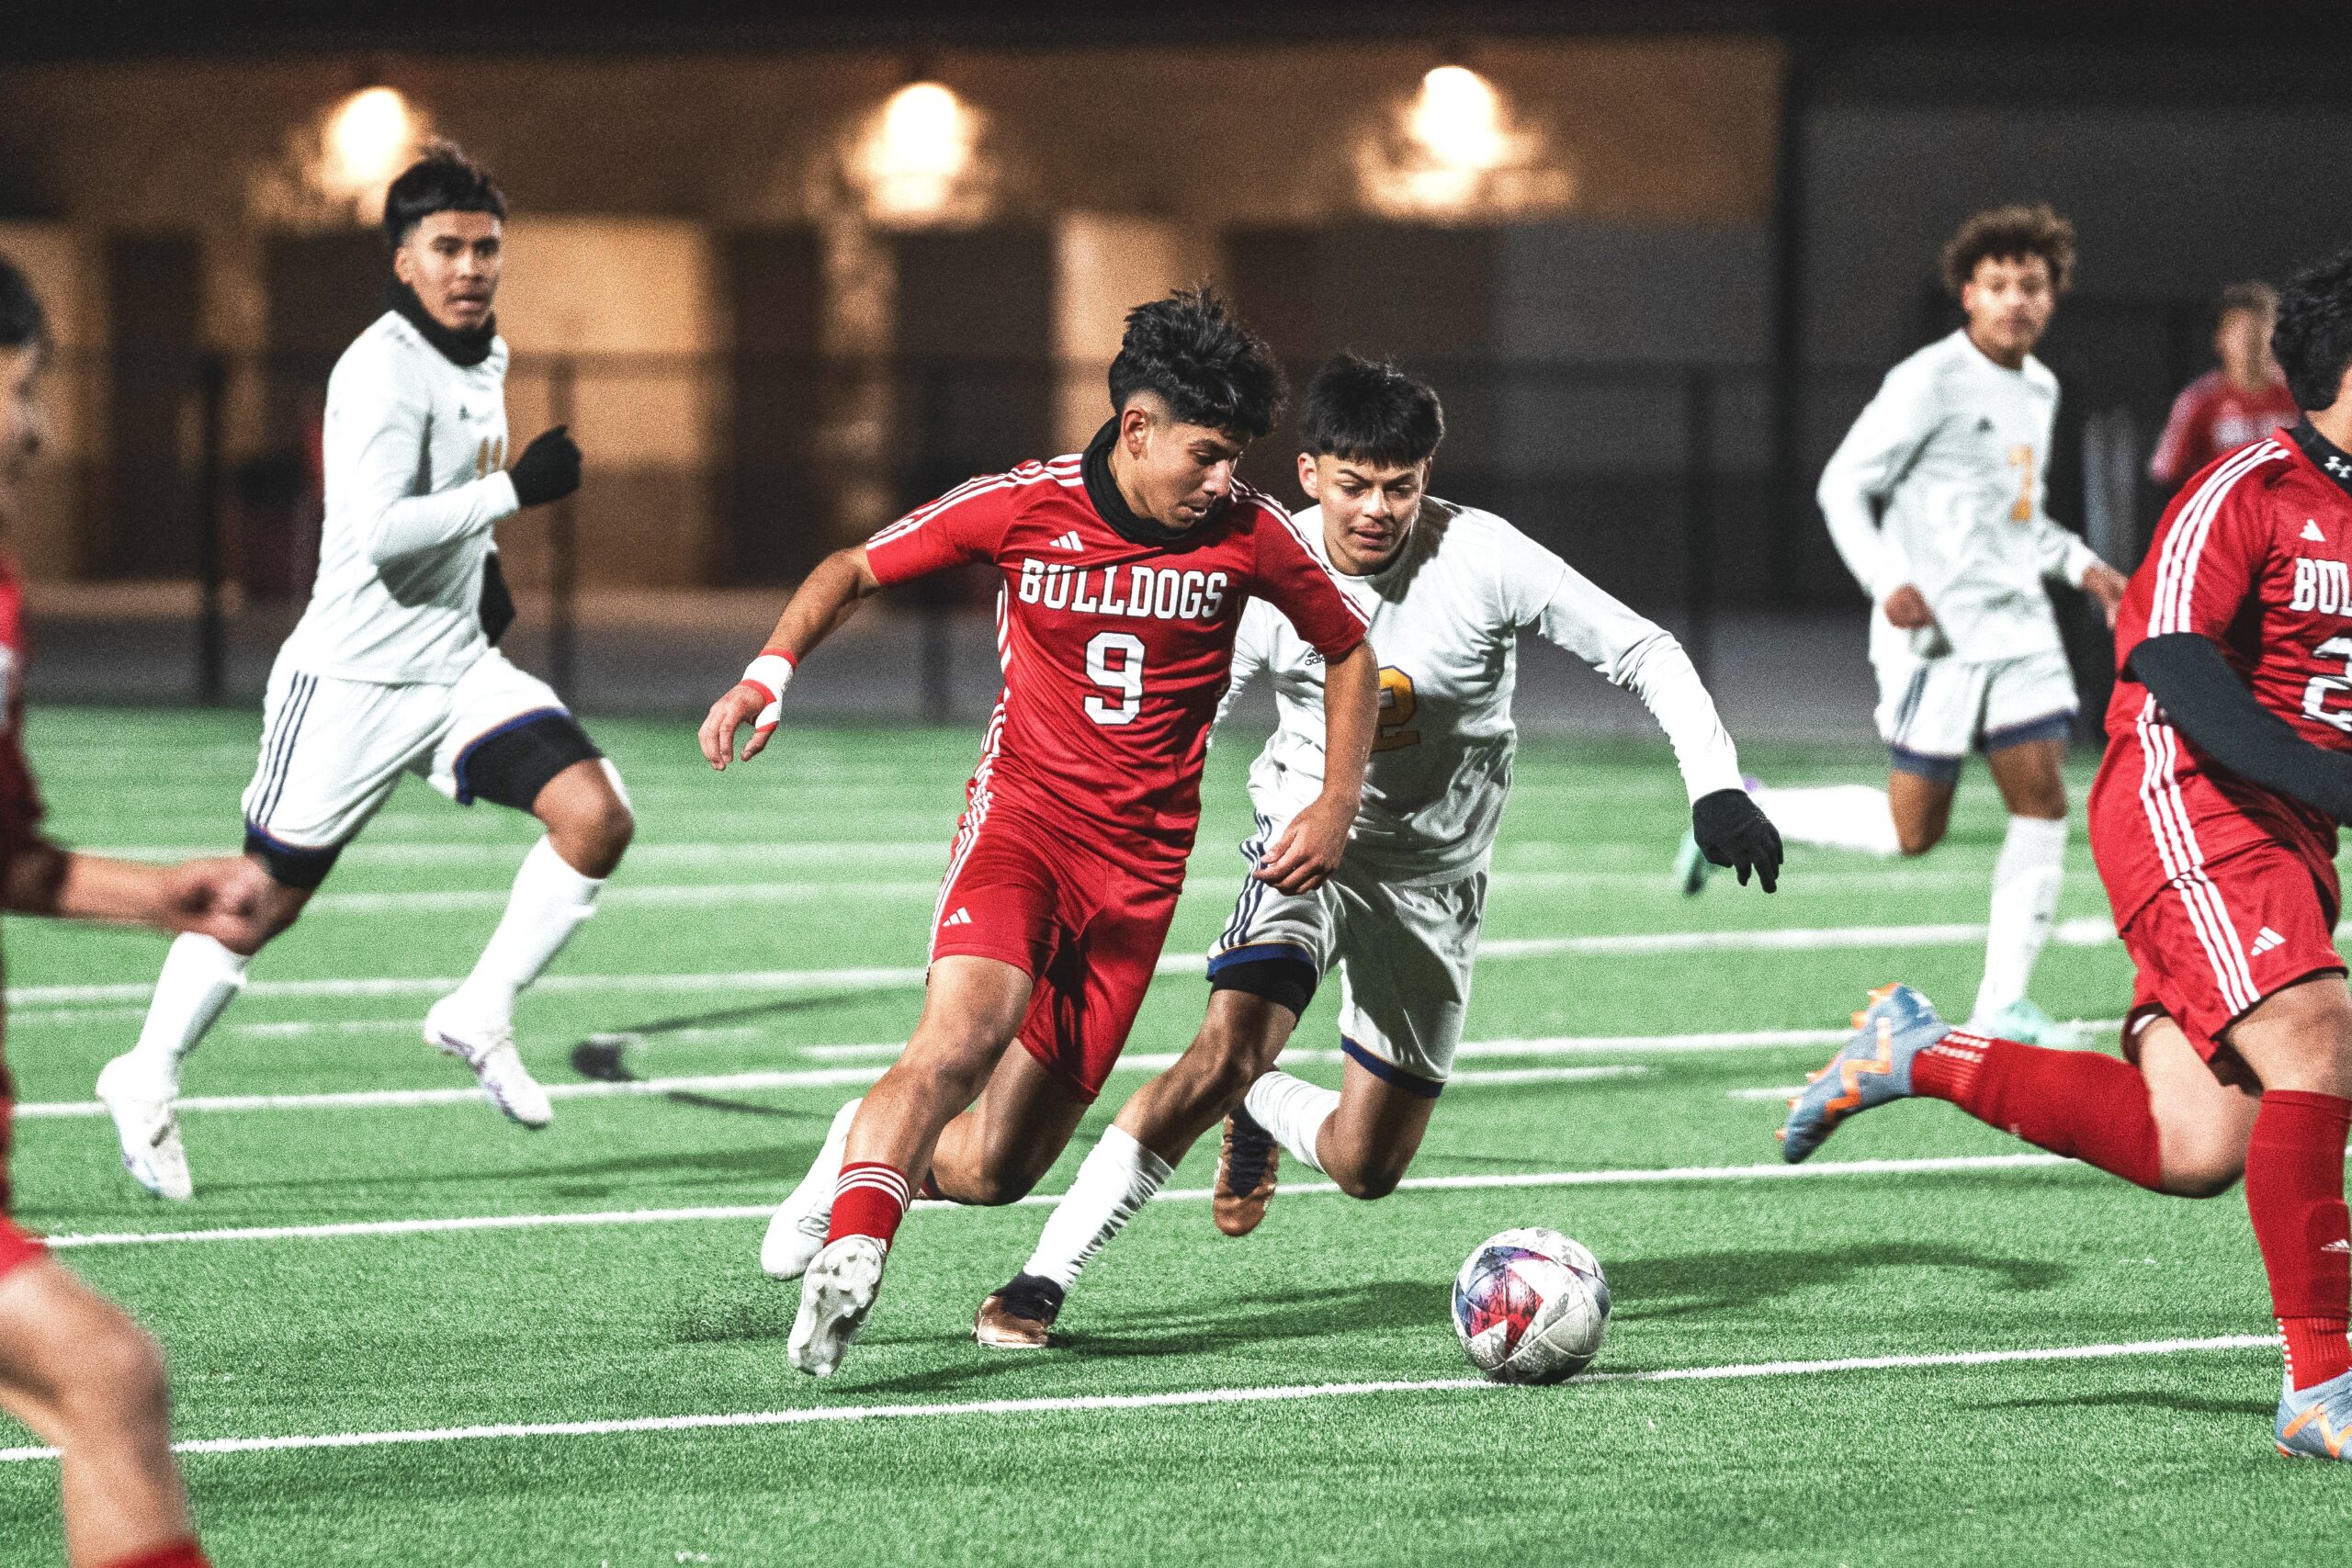 Kilgore High School senior soccer standout Diego Rojas (above, 9) was named the most valuable player of District 15-4A, as a part of the all-district team, voted on by the district's coaches recently. Below: Leo Yzaguirre, voted as co-utility player of the year. Yzaguirre and teammate Jose Vasquez, also a member of the all-district team, were also voted as members of the UIL State All-Tournament Team by members of the Texas Association of Soccer Coaches during the Bulldogs' state tournament run. (Photo above by ALEX NABOR - ETBLITZ.COM; Photo below courtesy of the UNIVERSITY INTERSCHOLASTIC LEAGUE)